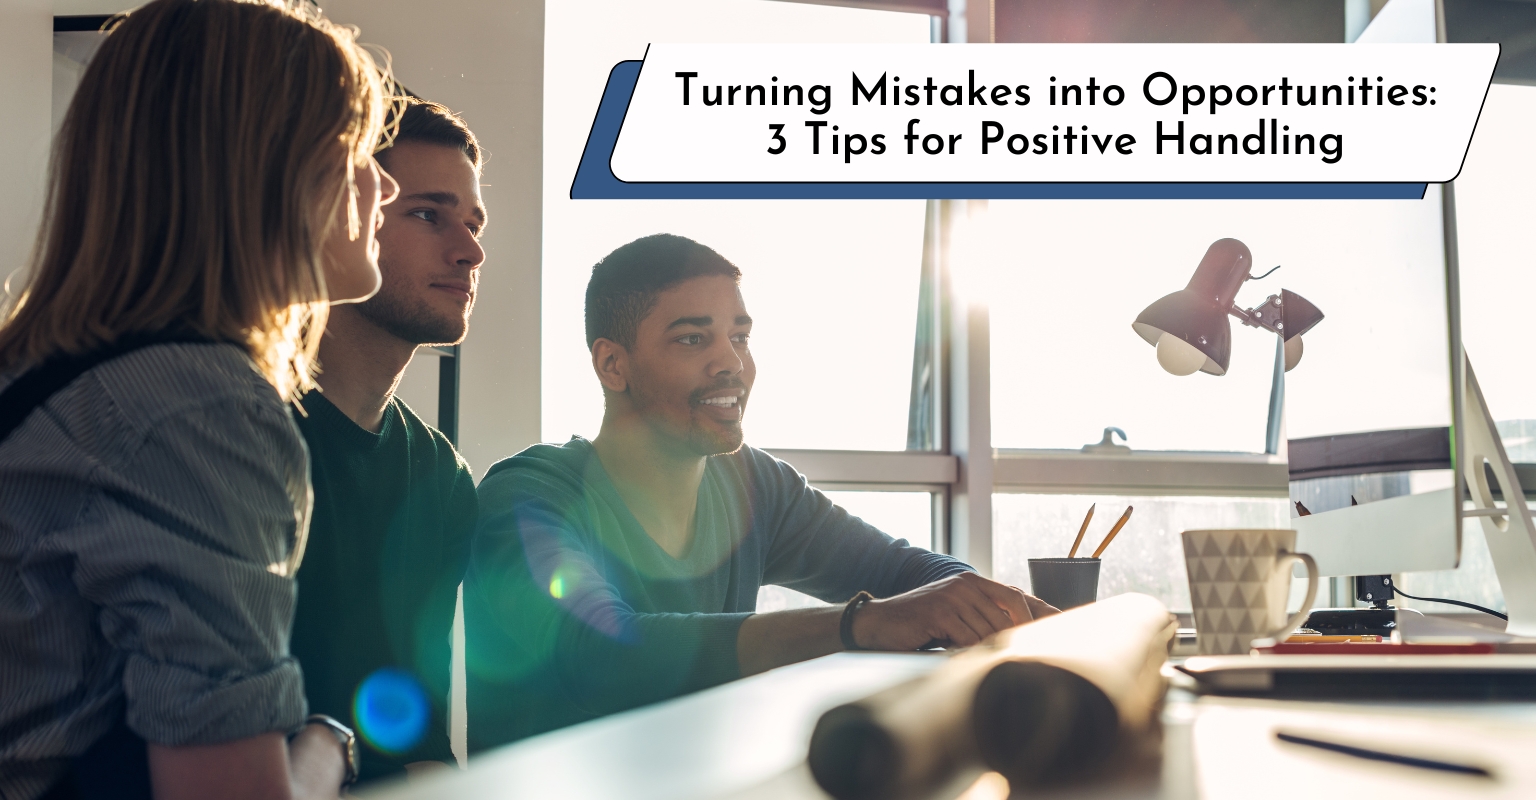 Turning mistakes into opportunities: tips for handling mistakes positively